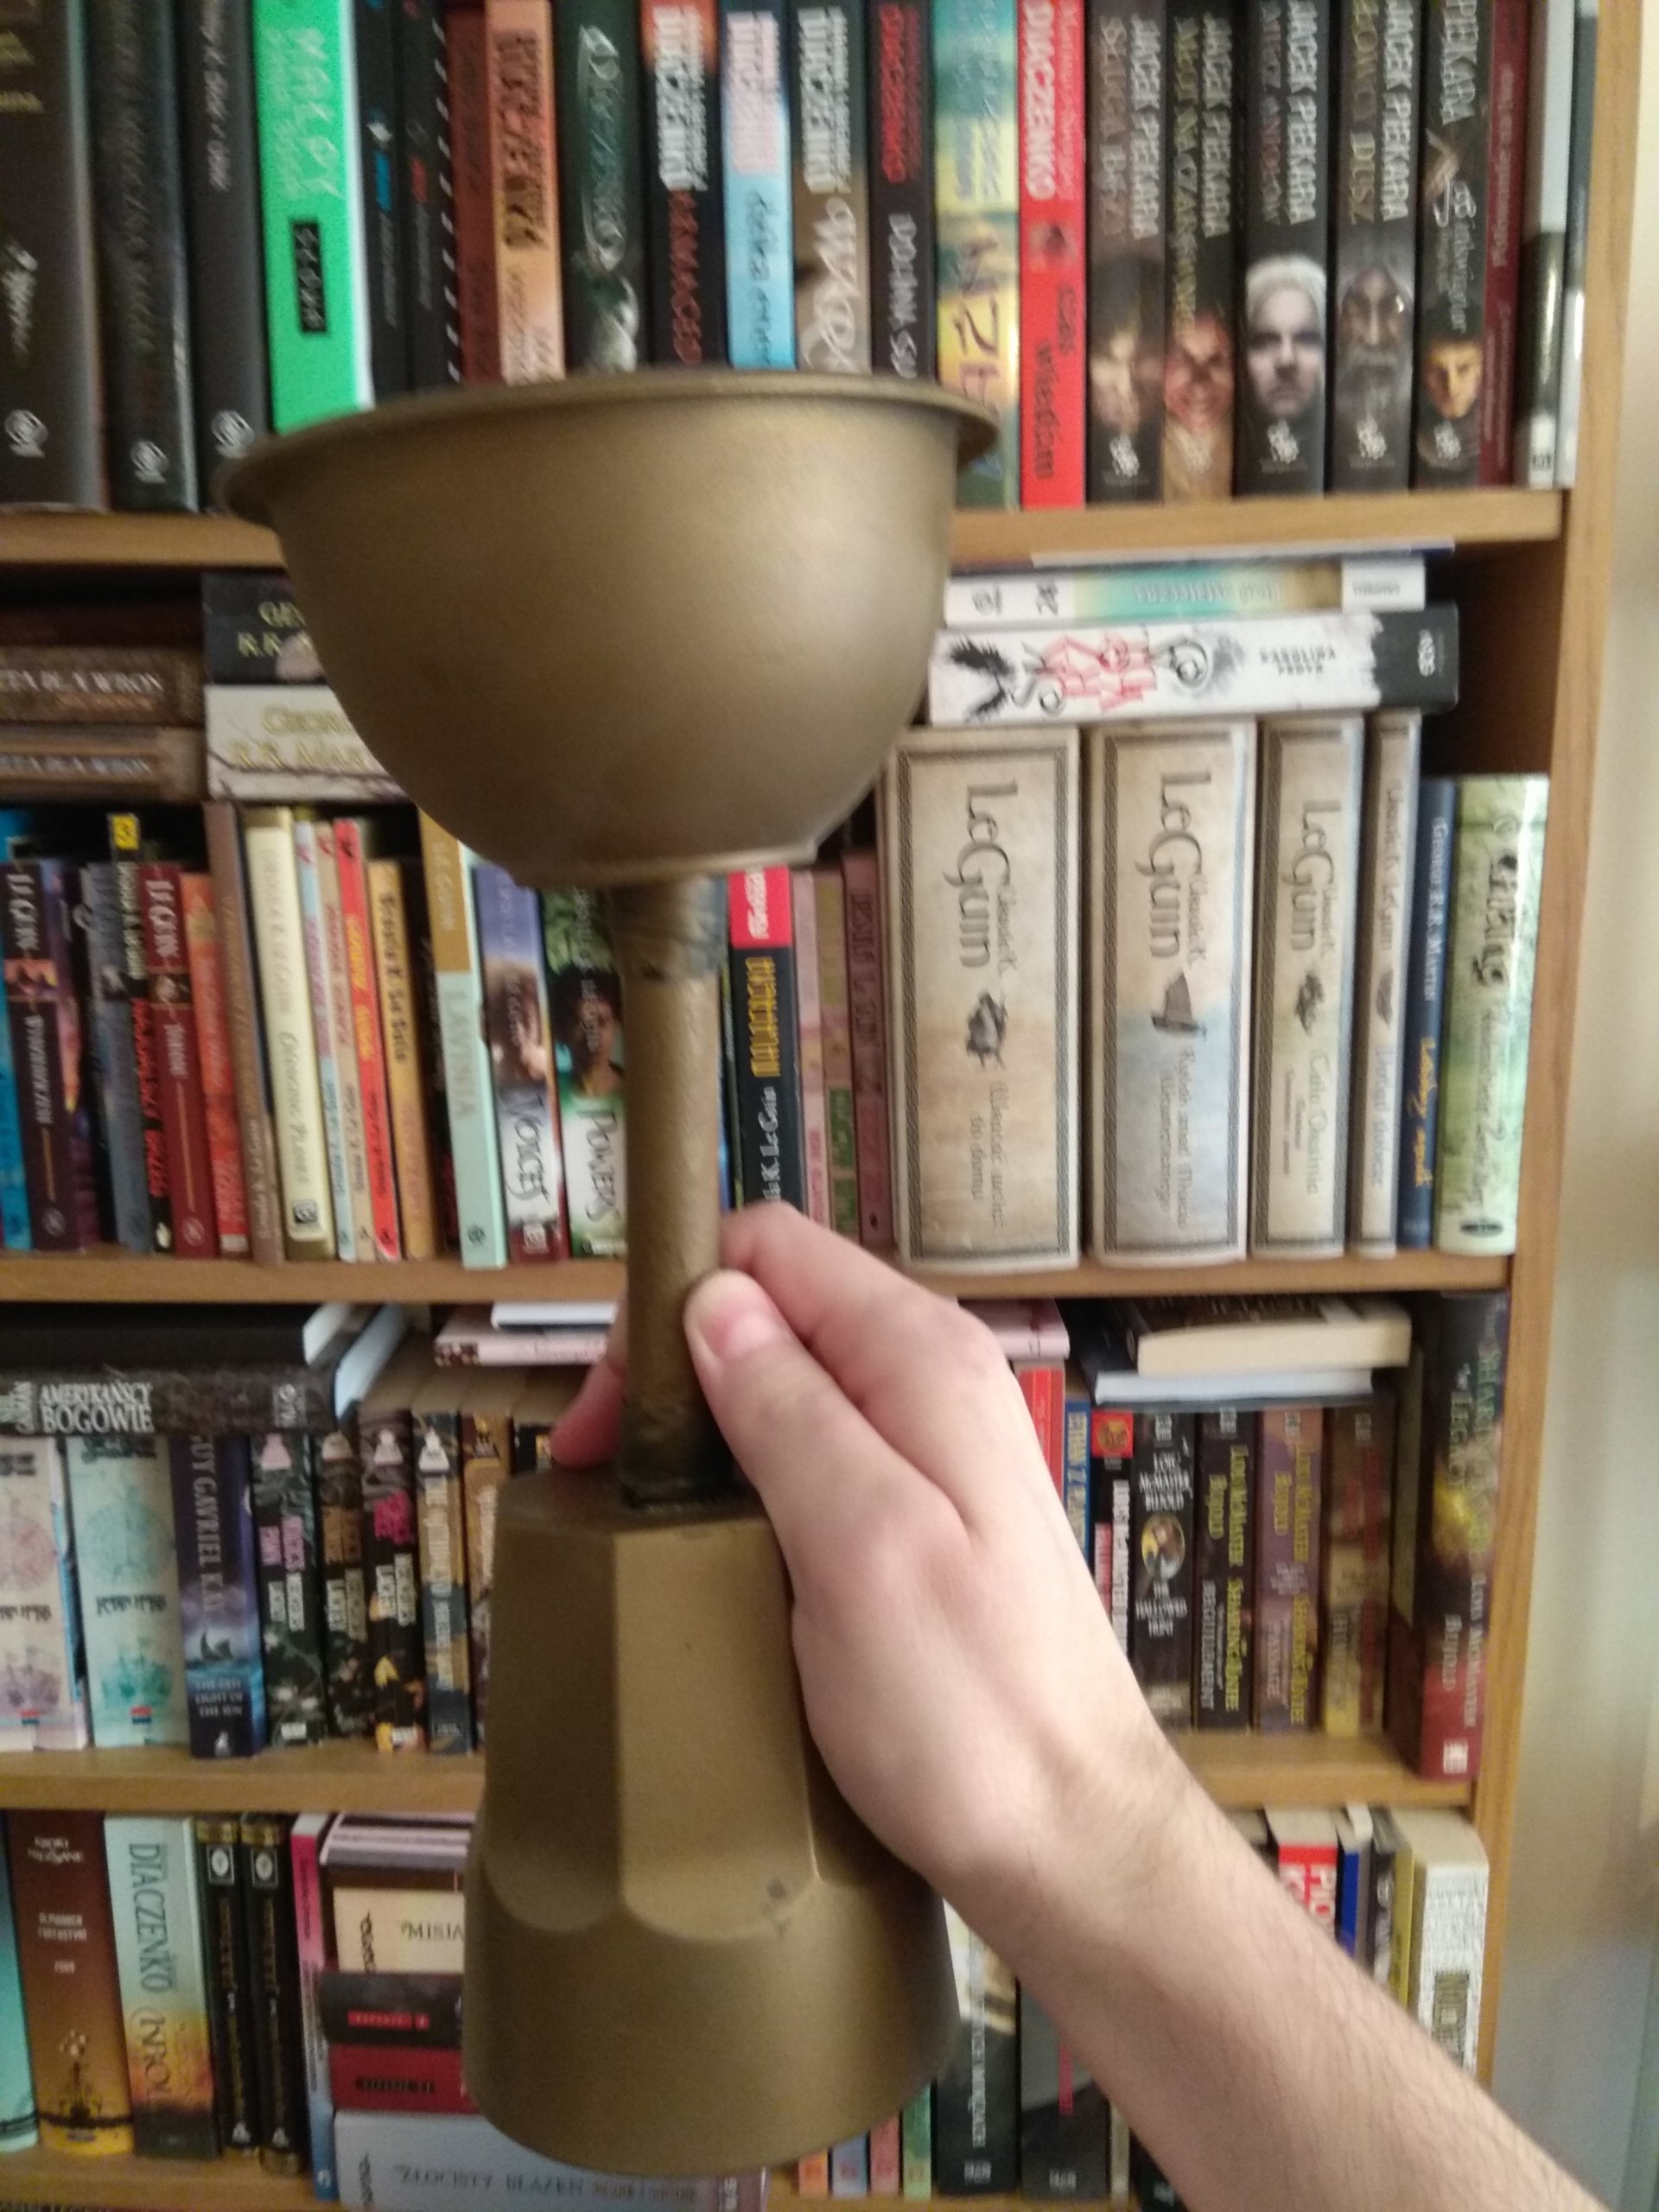 Hand holding a golden cup in front of the bookshelf.